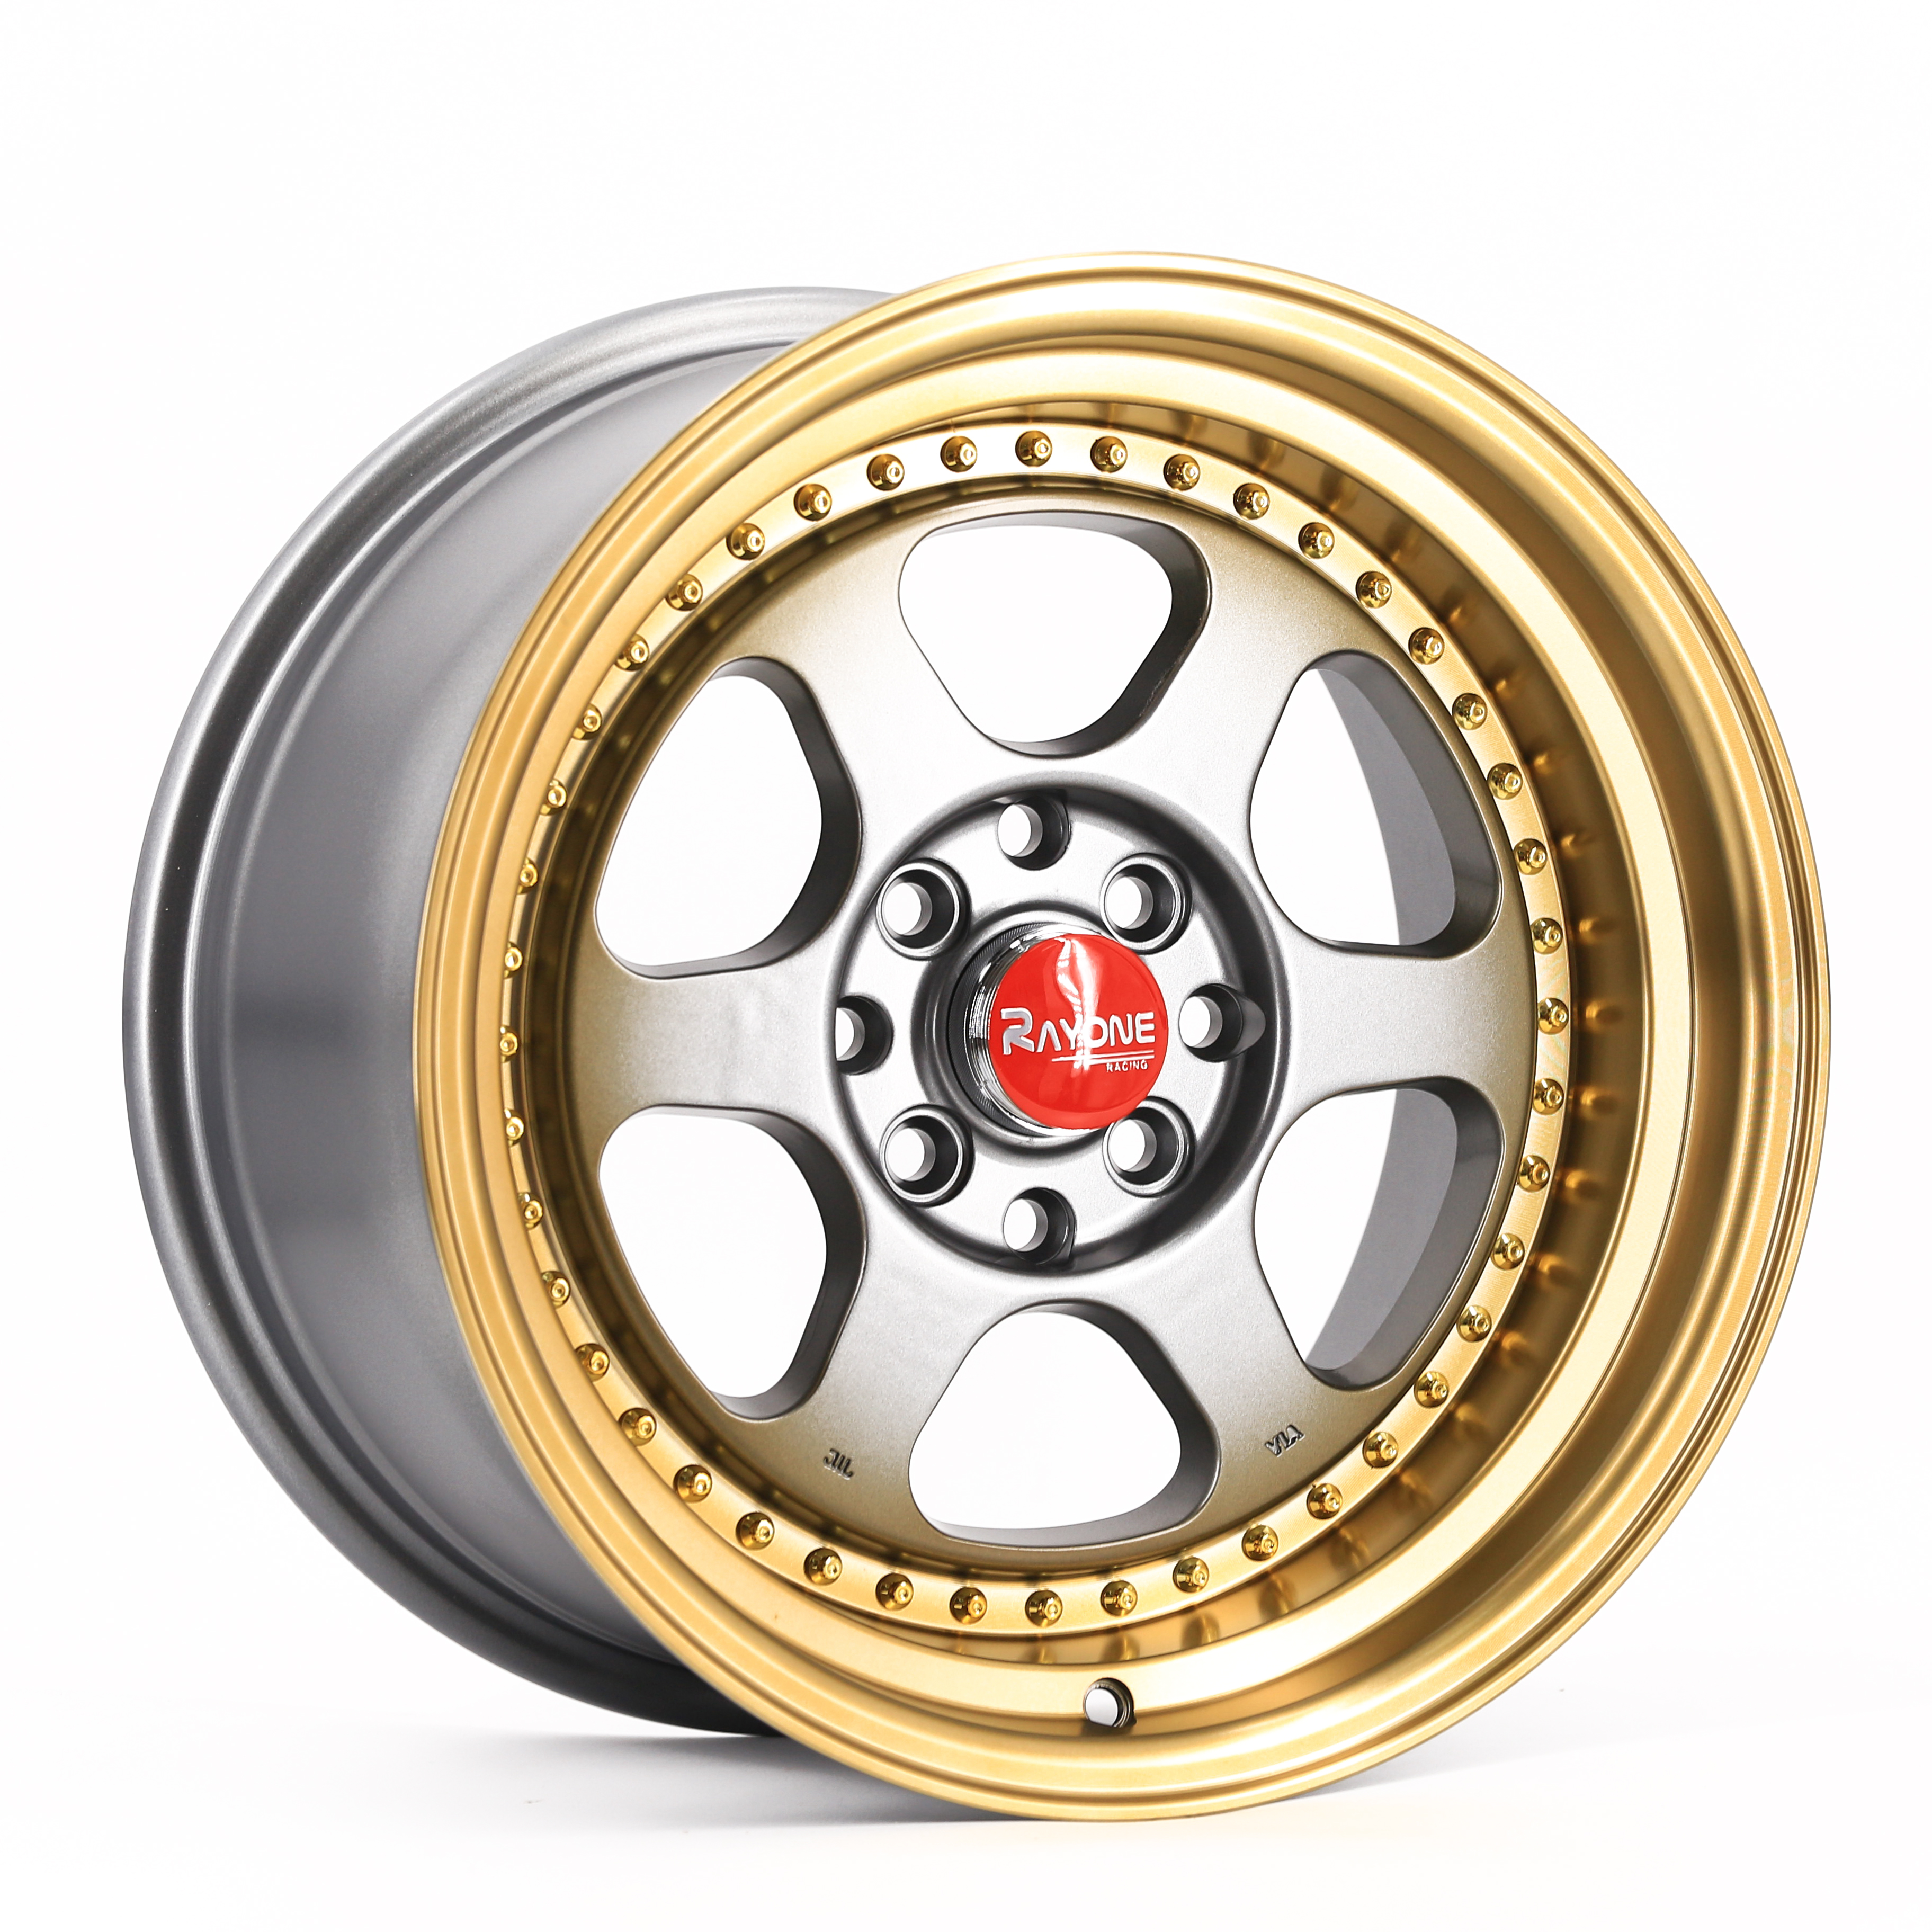 Gold Color Deep Dish Rivets 4 Hole Rims 15 Inch Alloy Wheels For Racing Car